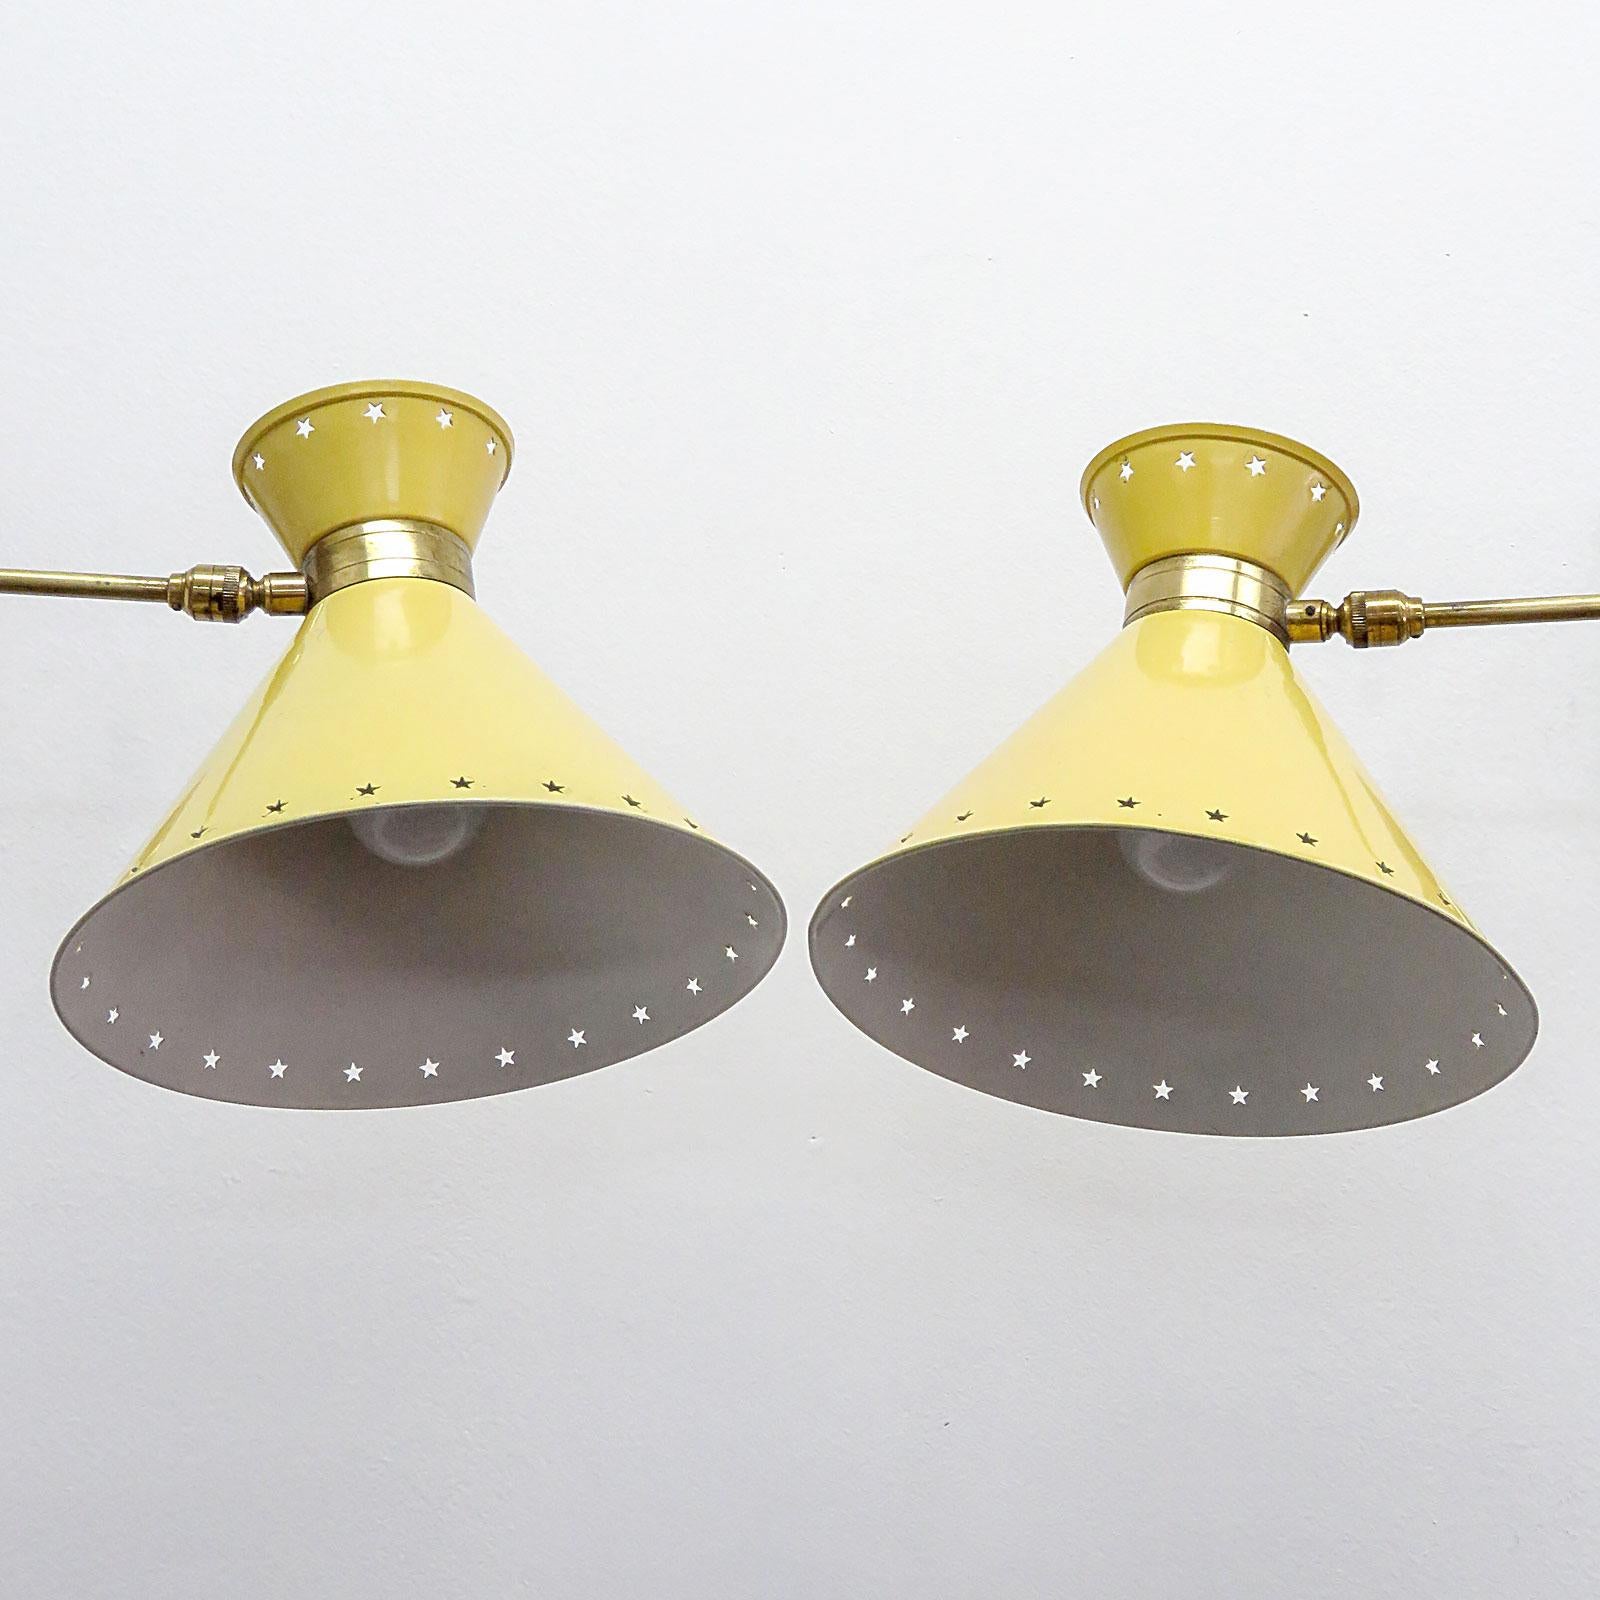 Mid-20th Century Swing Arm Wall Light by Rene Mathieu for Lunel, 1950 For Sale